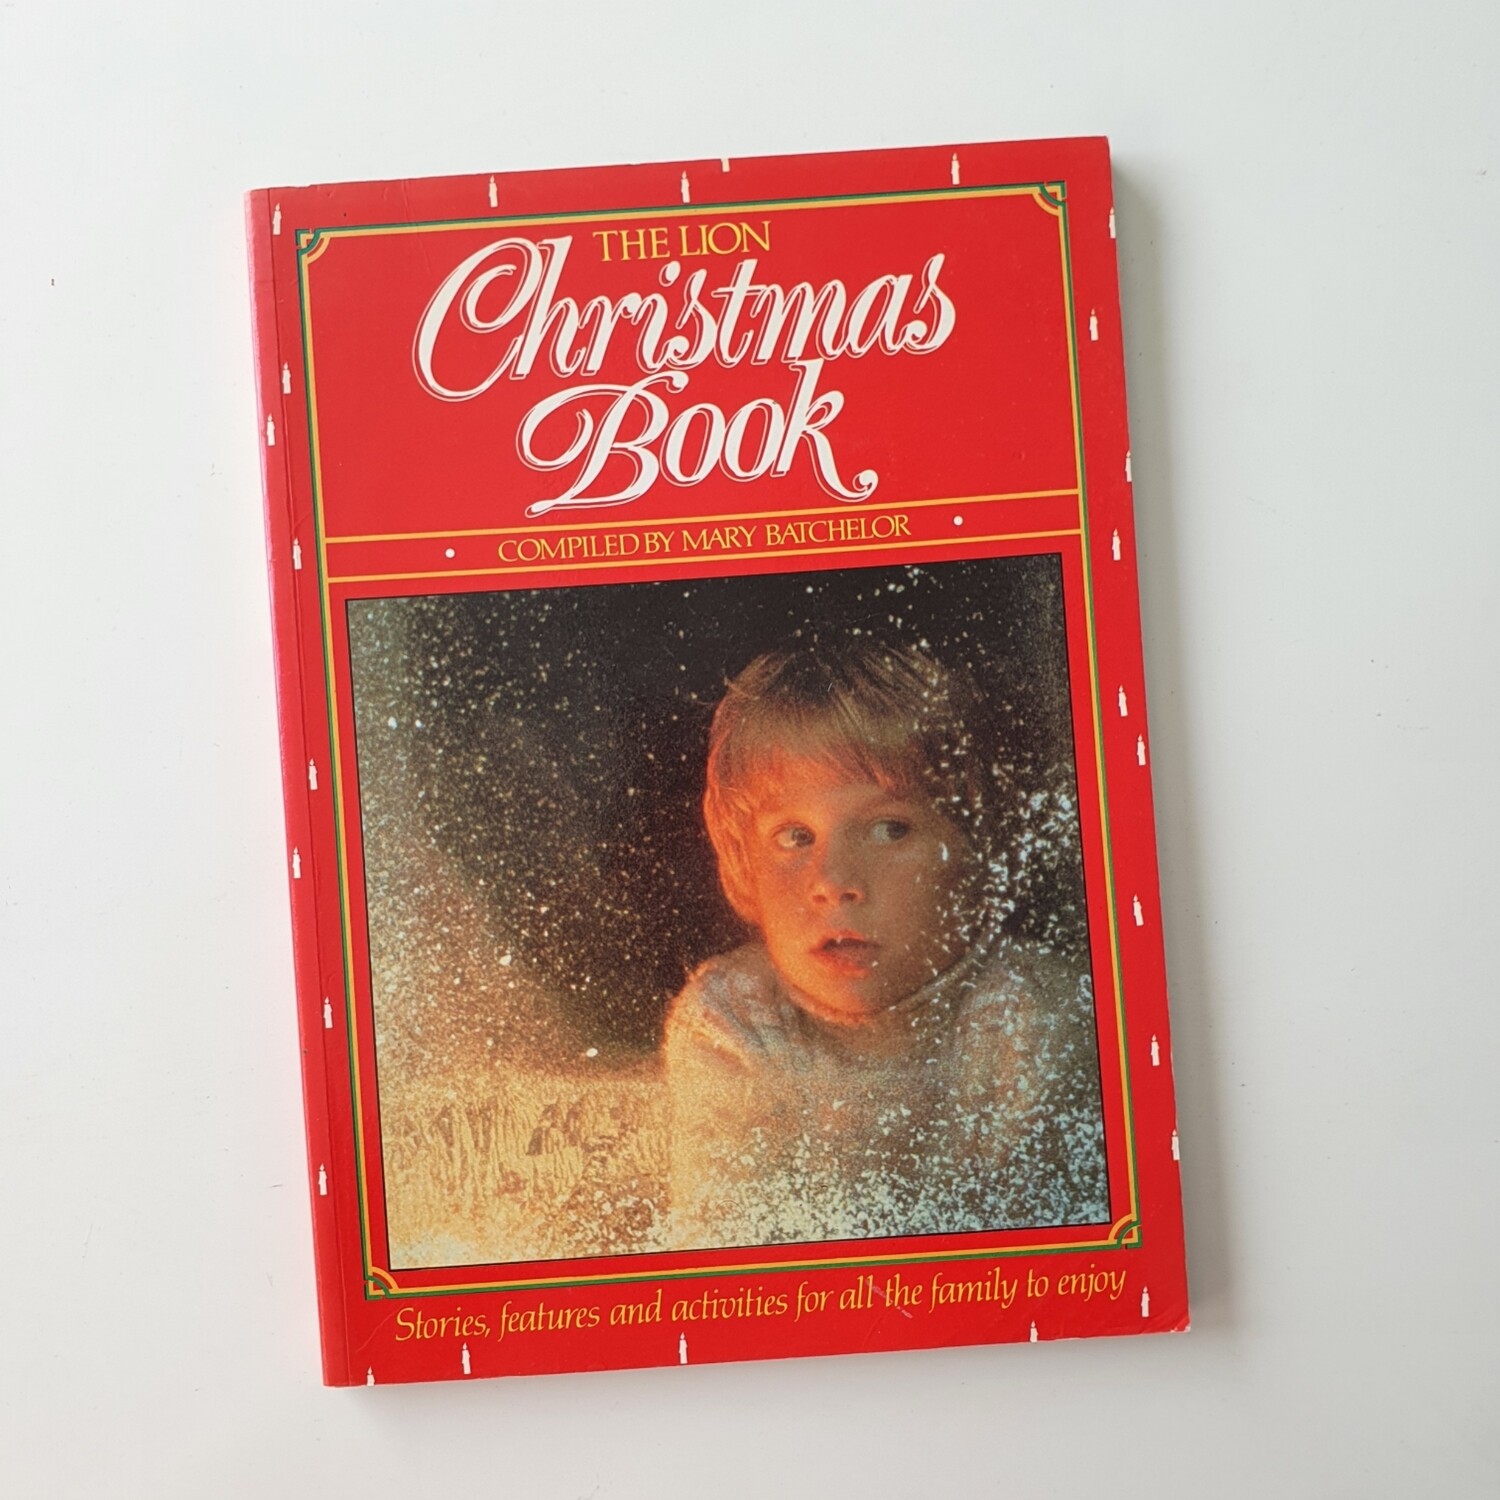 The Lion Christmas Book - snow  Notebook - made from a paperback book, no original book pages